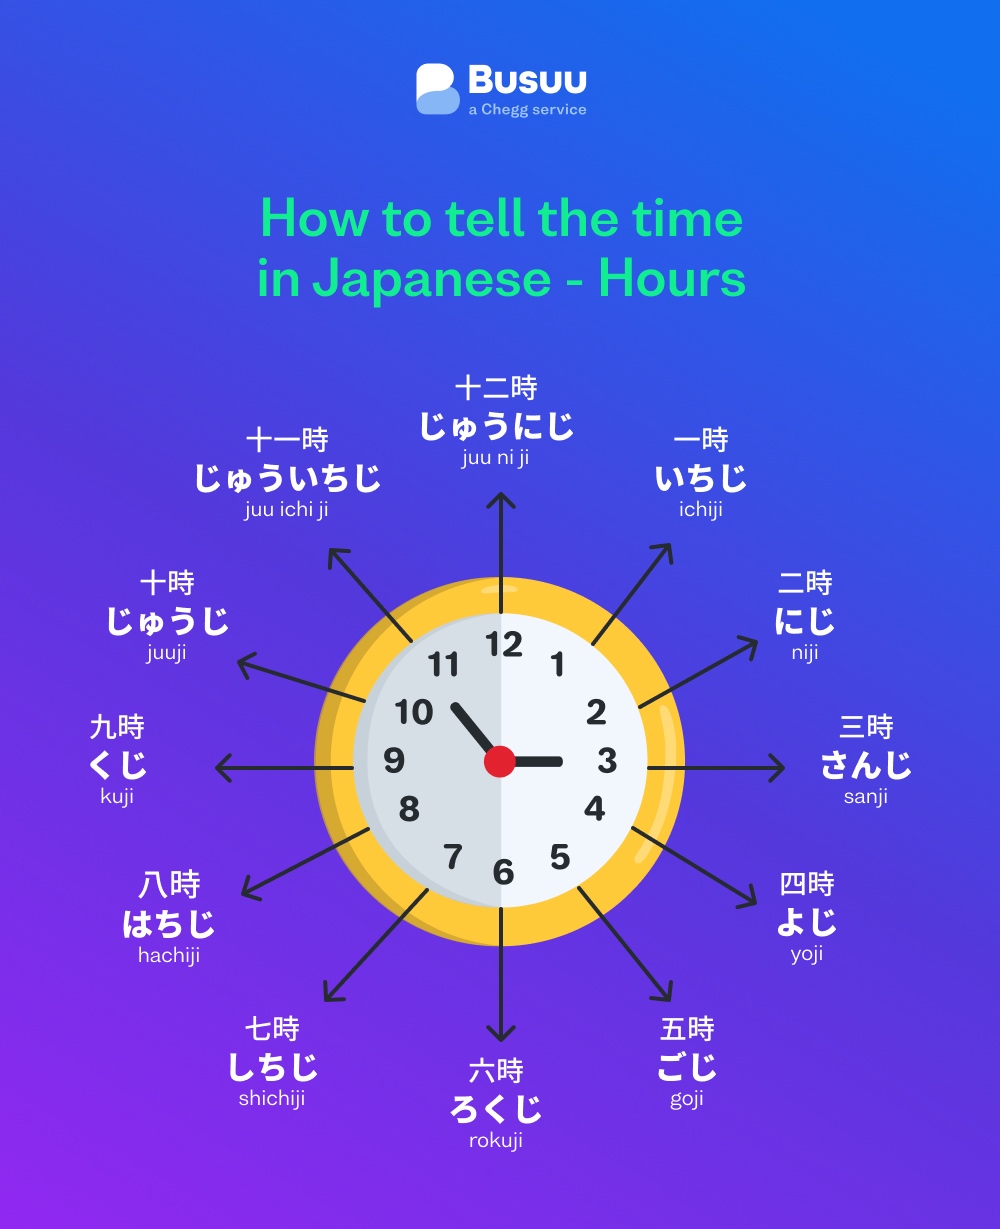 Time in Japanese - Hours